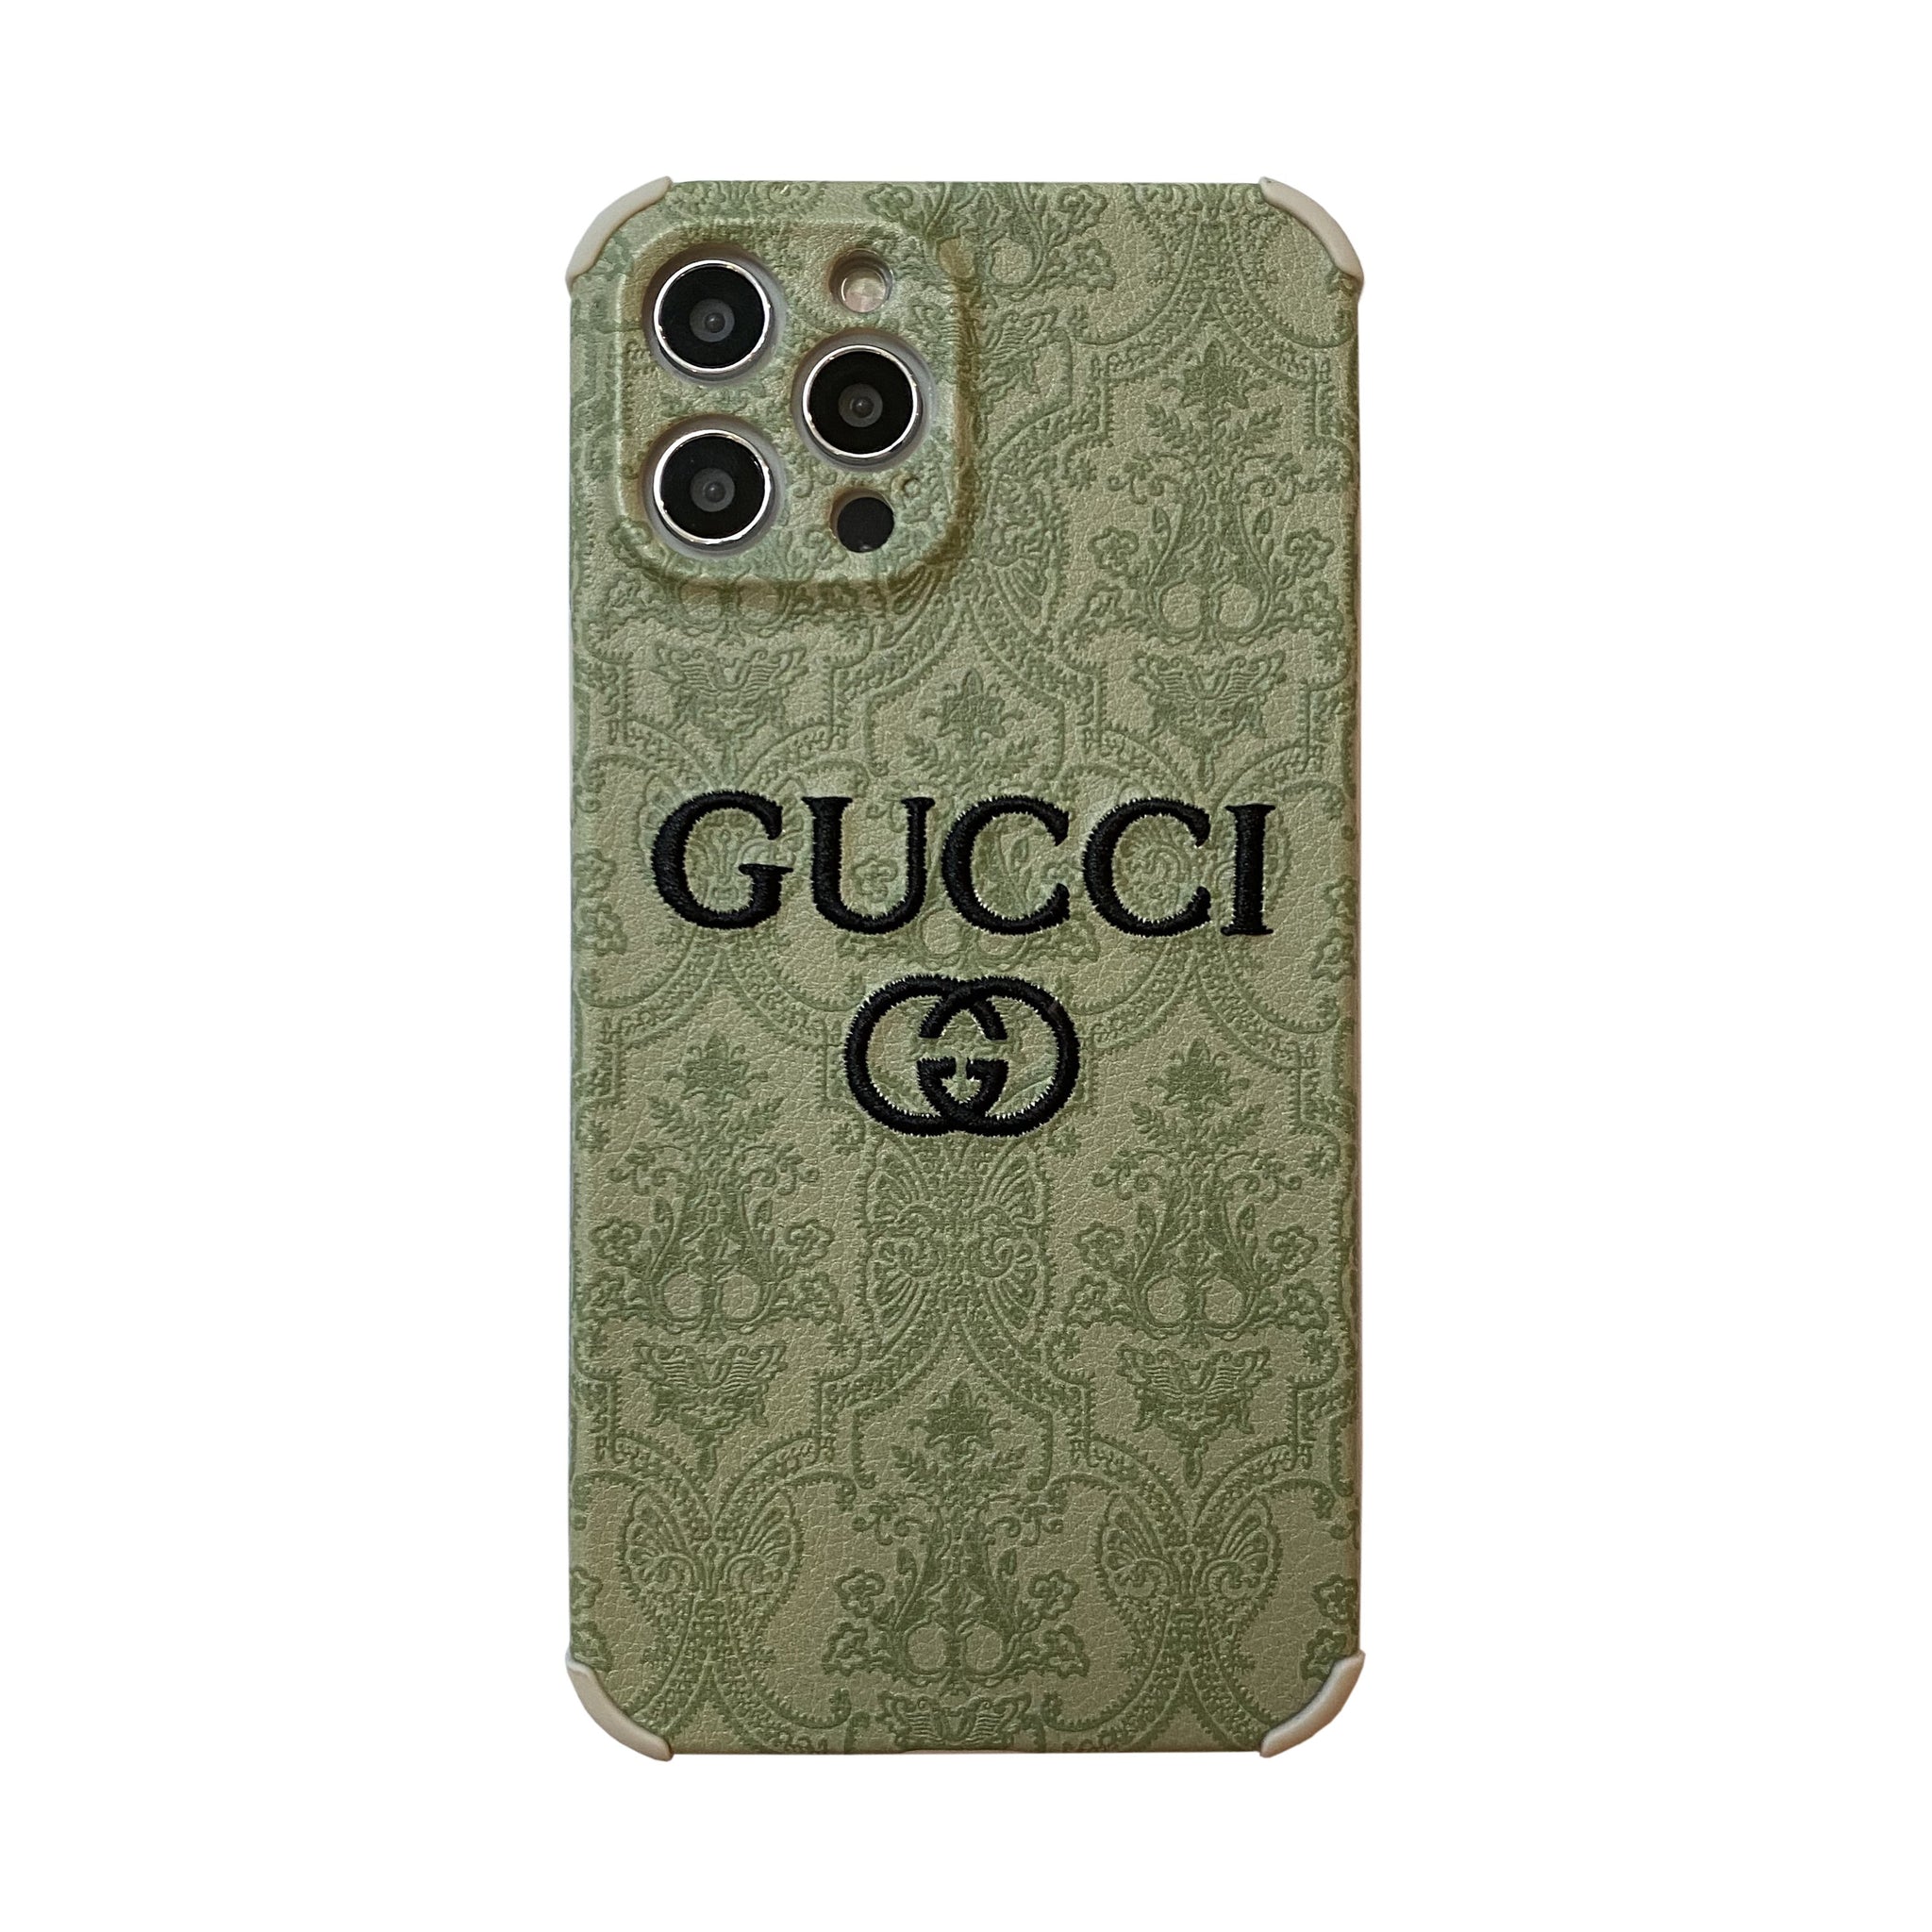 IPhone 12 Pro Max Case - Gucci Embroidered